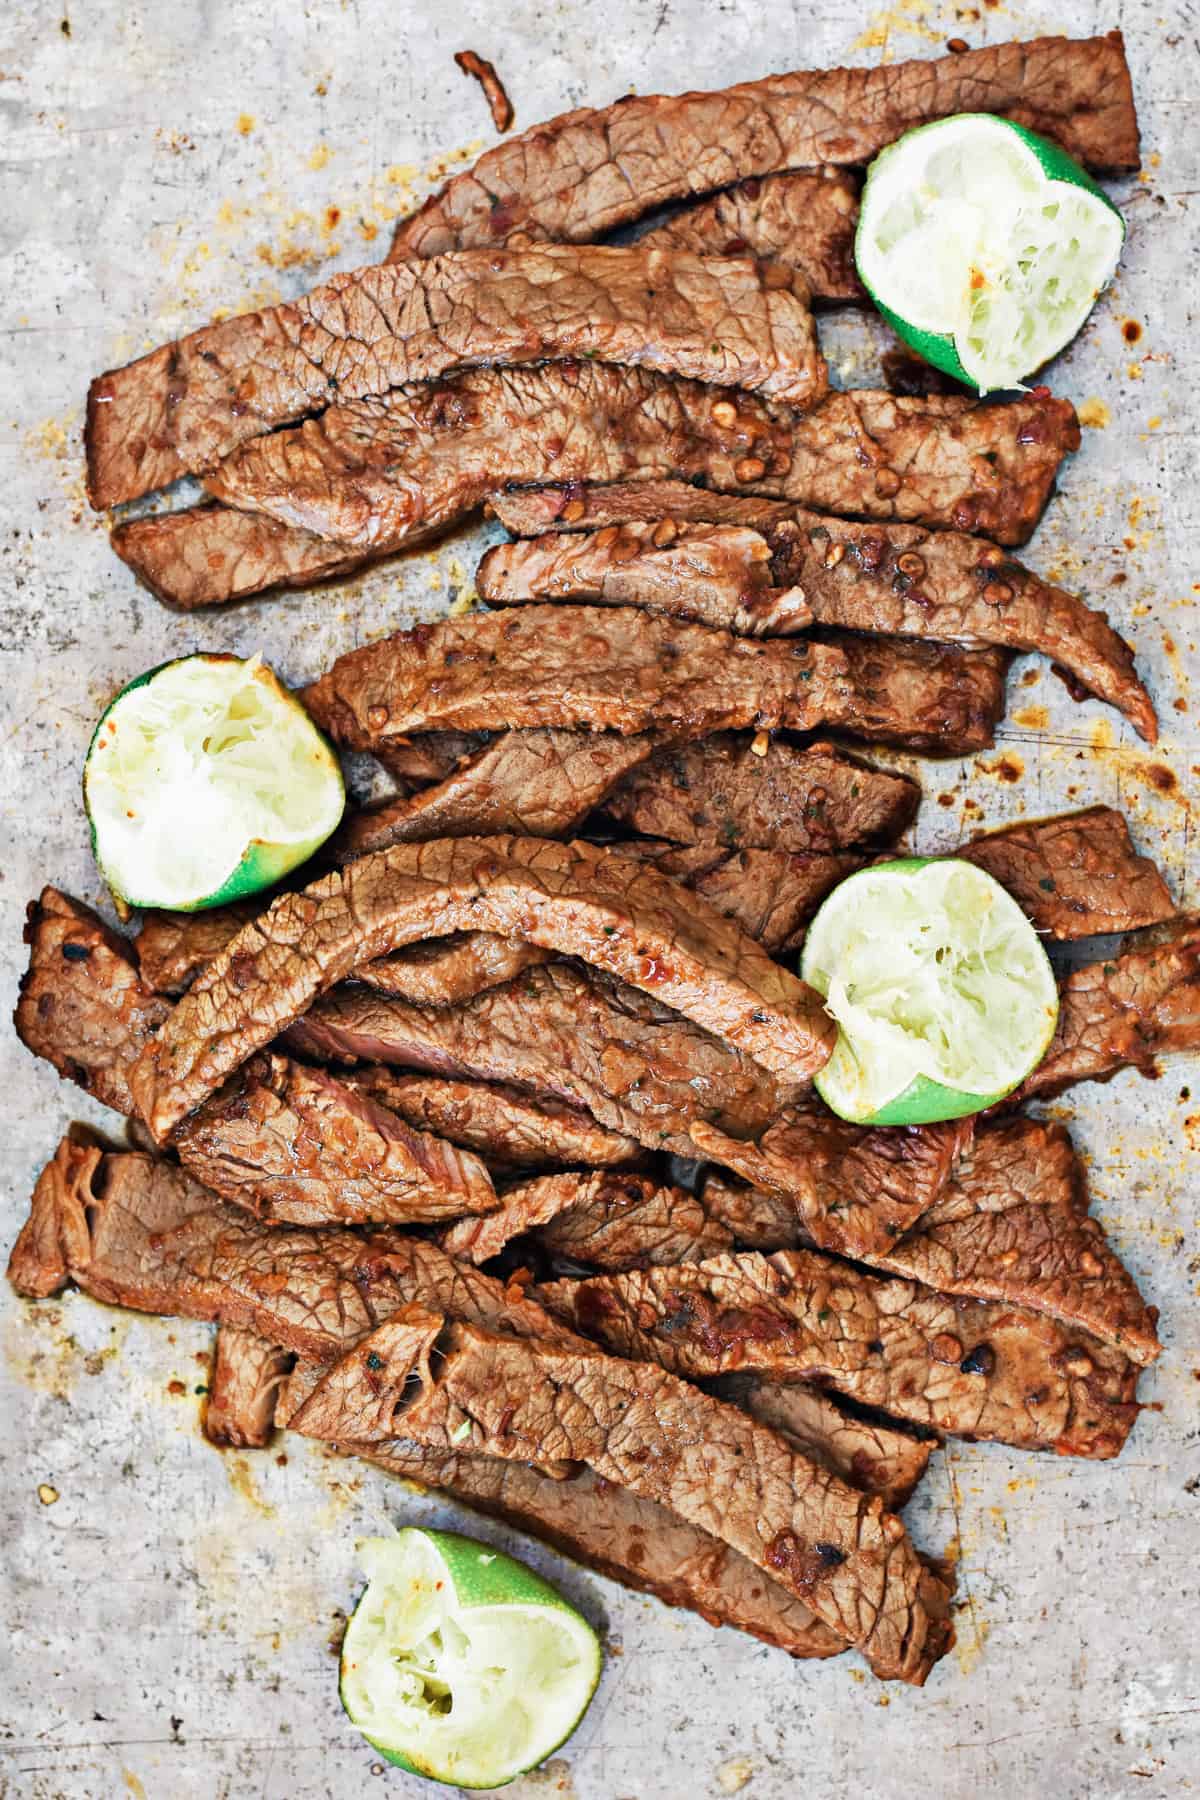 This grilled chipotle lime steak fajita salad is made in 30 minutes (after a savory marinade time) and is a filling and nutritious meal to serve for dinner. It can also be made ahead for a meal prep lunch salad, and is full of delicious flavor. || The Butter Half #salad #lunch #easyrecipe #chipotle #thebutterhalf